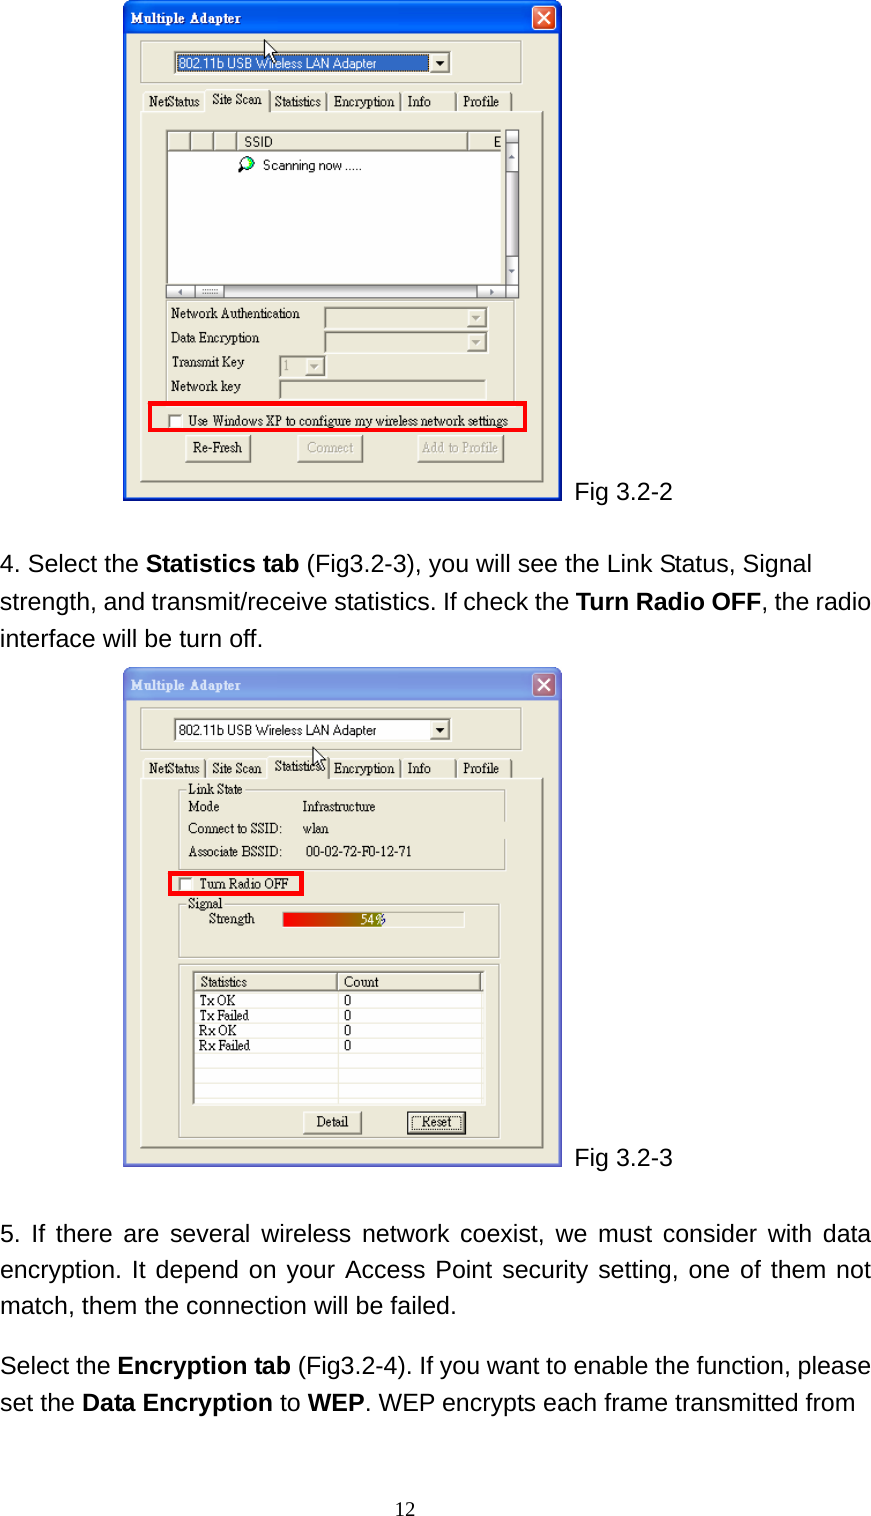  Fig 3.2-2  4. Select the Statistics tab (Fig3.2-3), you will see the Link Status, Signal strength, and transmit/receive statistics. If check the Turn Radio OFF, the radio interface will be turn off.  Fig 3.2-3  5. If there are several wireless network coexist, we must consider with data encryption. It depend on your Access Point security setting, one of them not match, them the connection will be failed.   Select the Encryption tab (Fig3.2-4). If you want to enable the function, please set the Data Encryption to WEP. WEP encrypts each frame transmitted from   12 